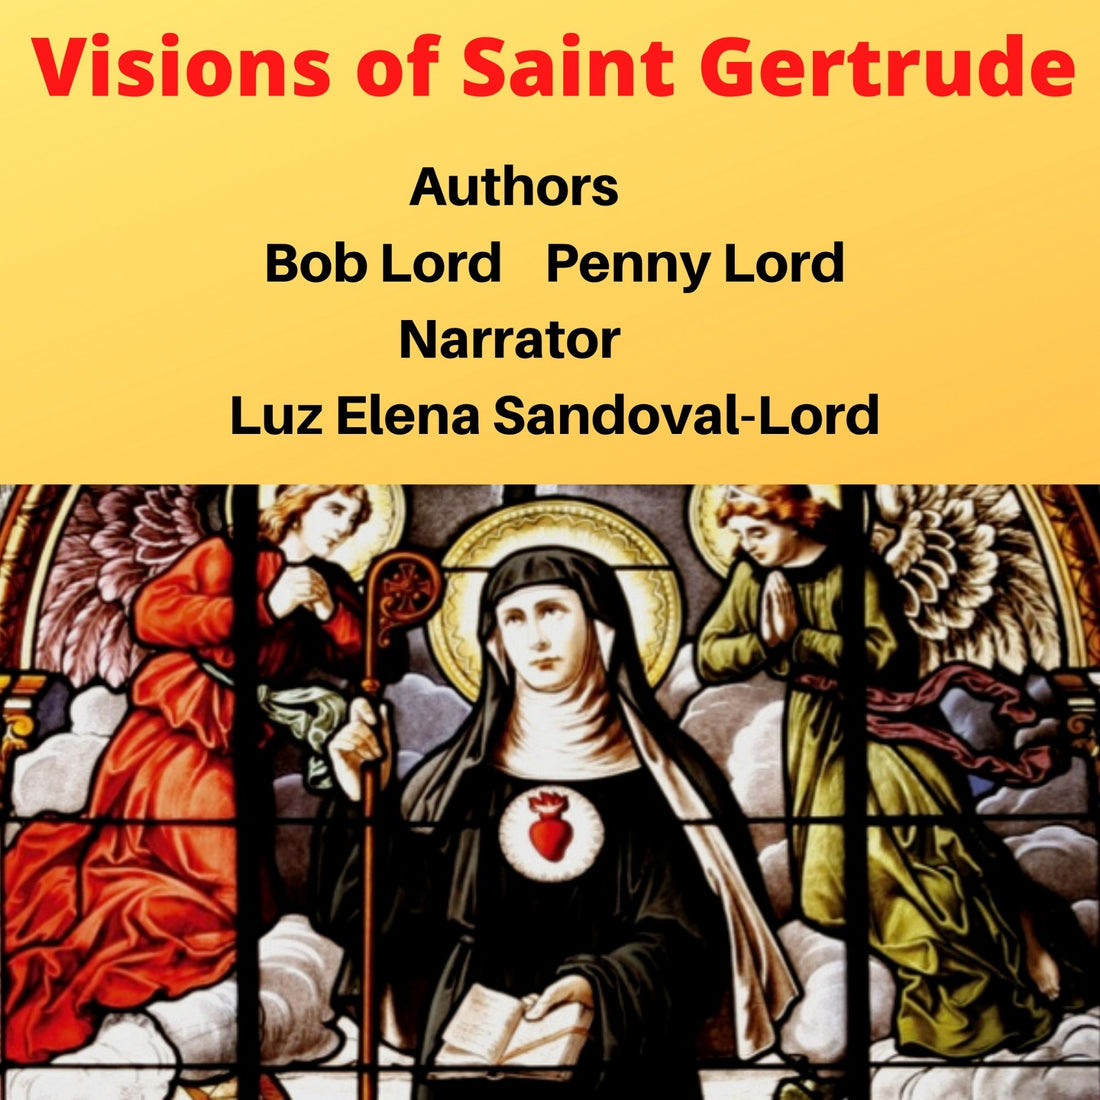 Feast of Saint Gertrude the Great